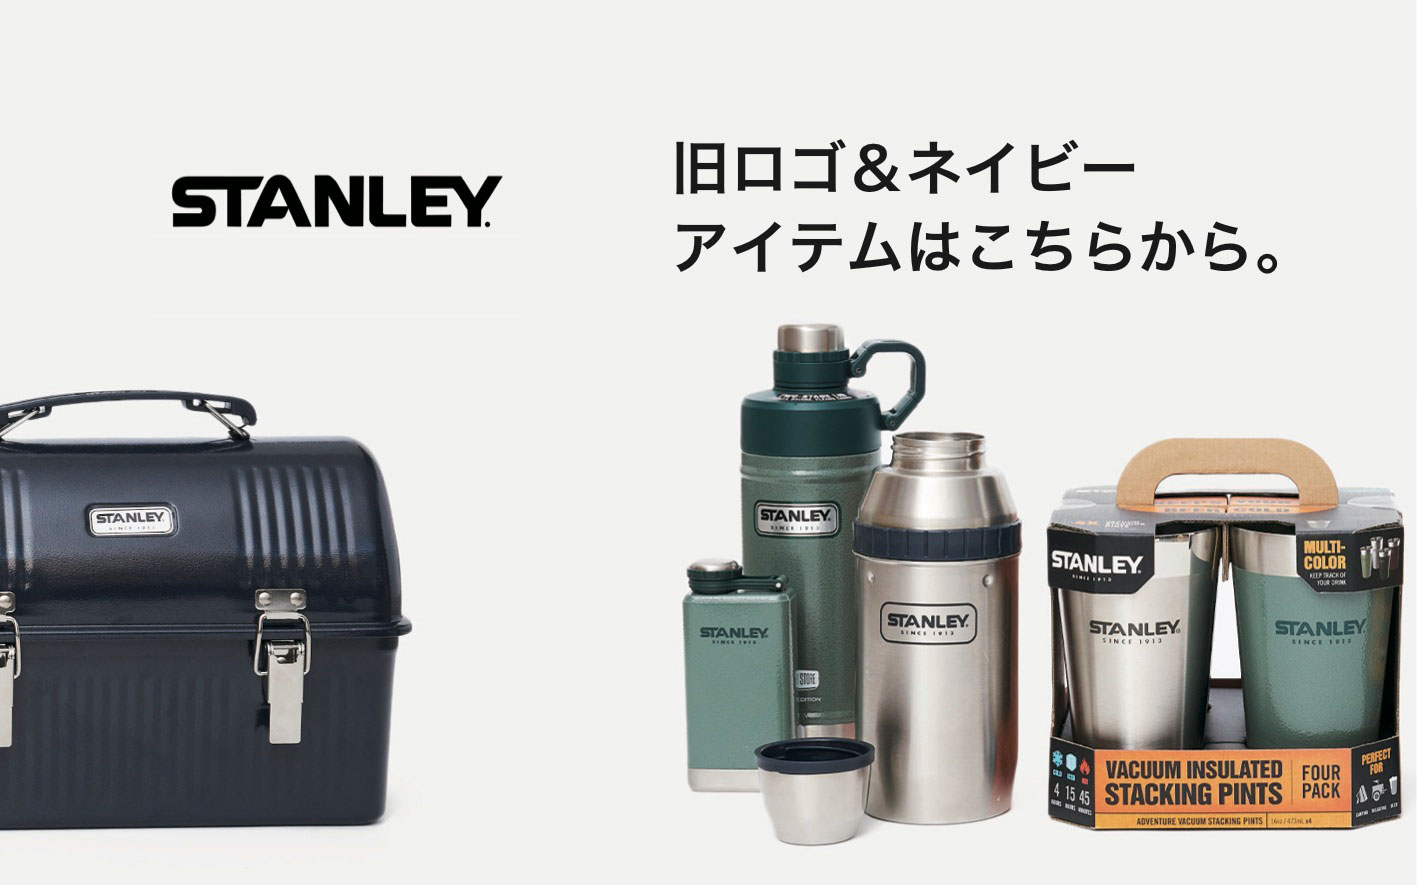 STANLEY 旧ロゴアイテム | UNBY ONLINE STORE